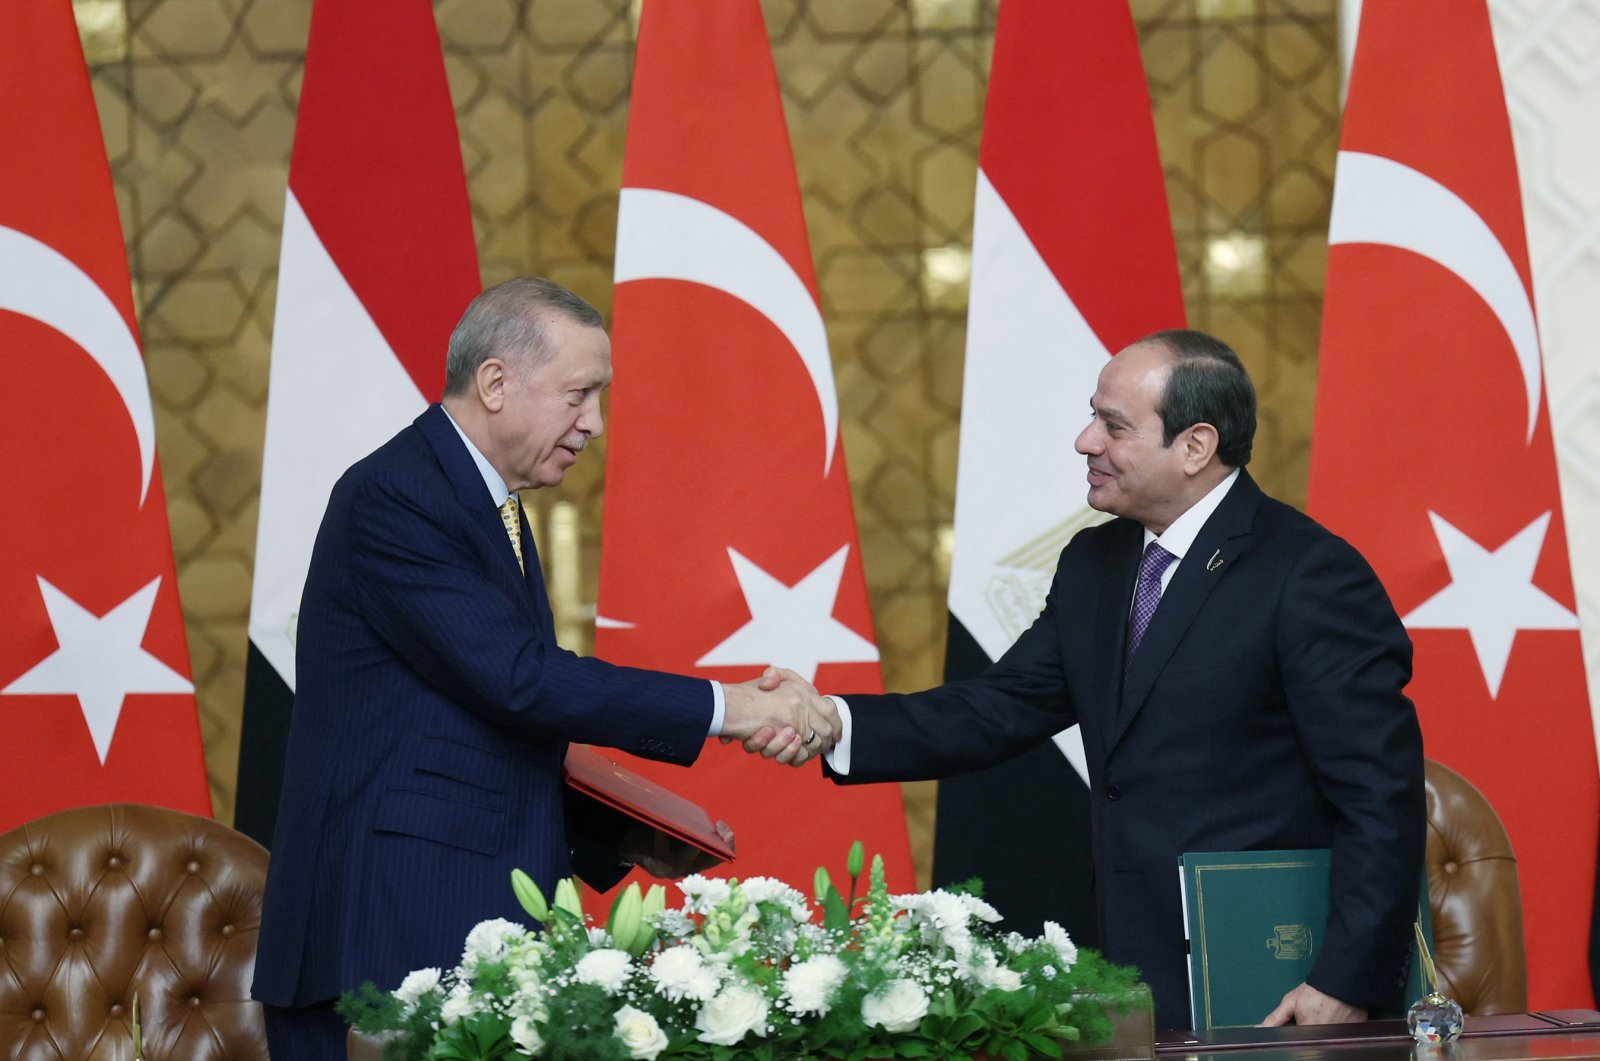 President Recep Tayyip Erdoğan and Egyptian President Abdel Fattah al-Sisi attend a signing ceremony in Cairo, Egypt, Feb. 14, 2024. (Reuters Photo)